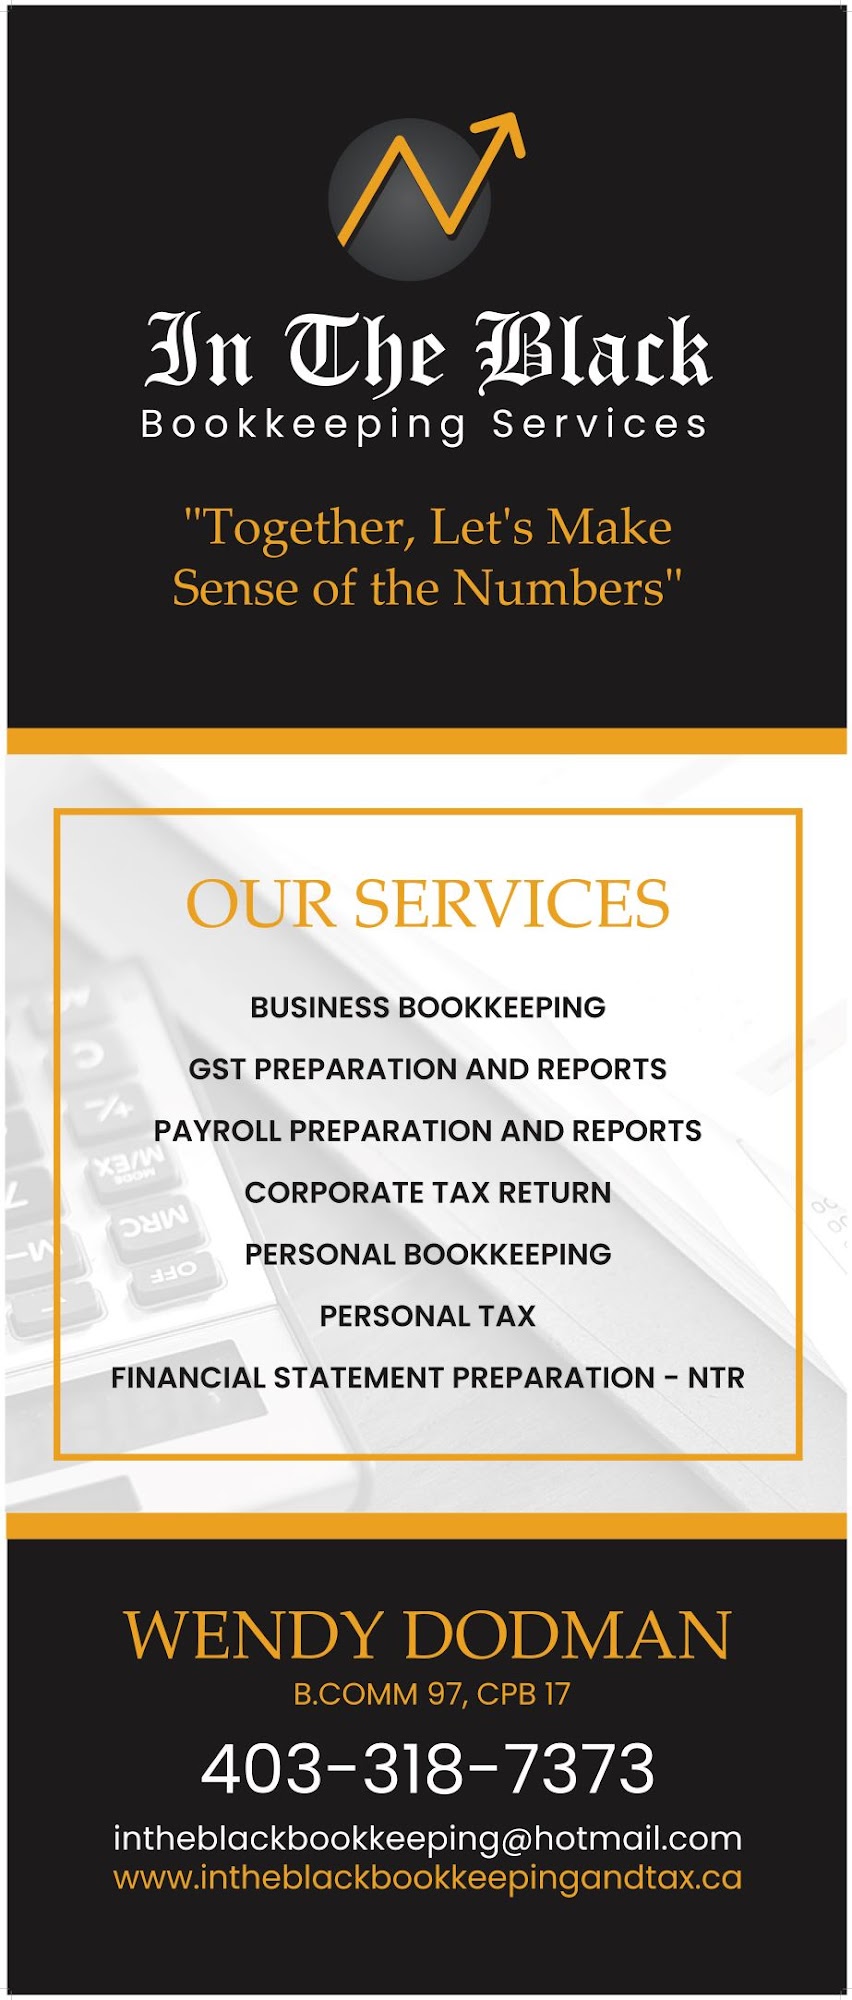 In The Black Bookkeeping Services